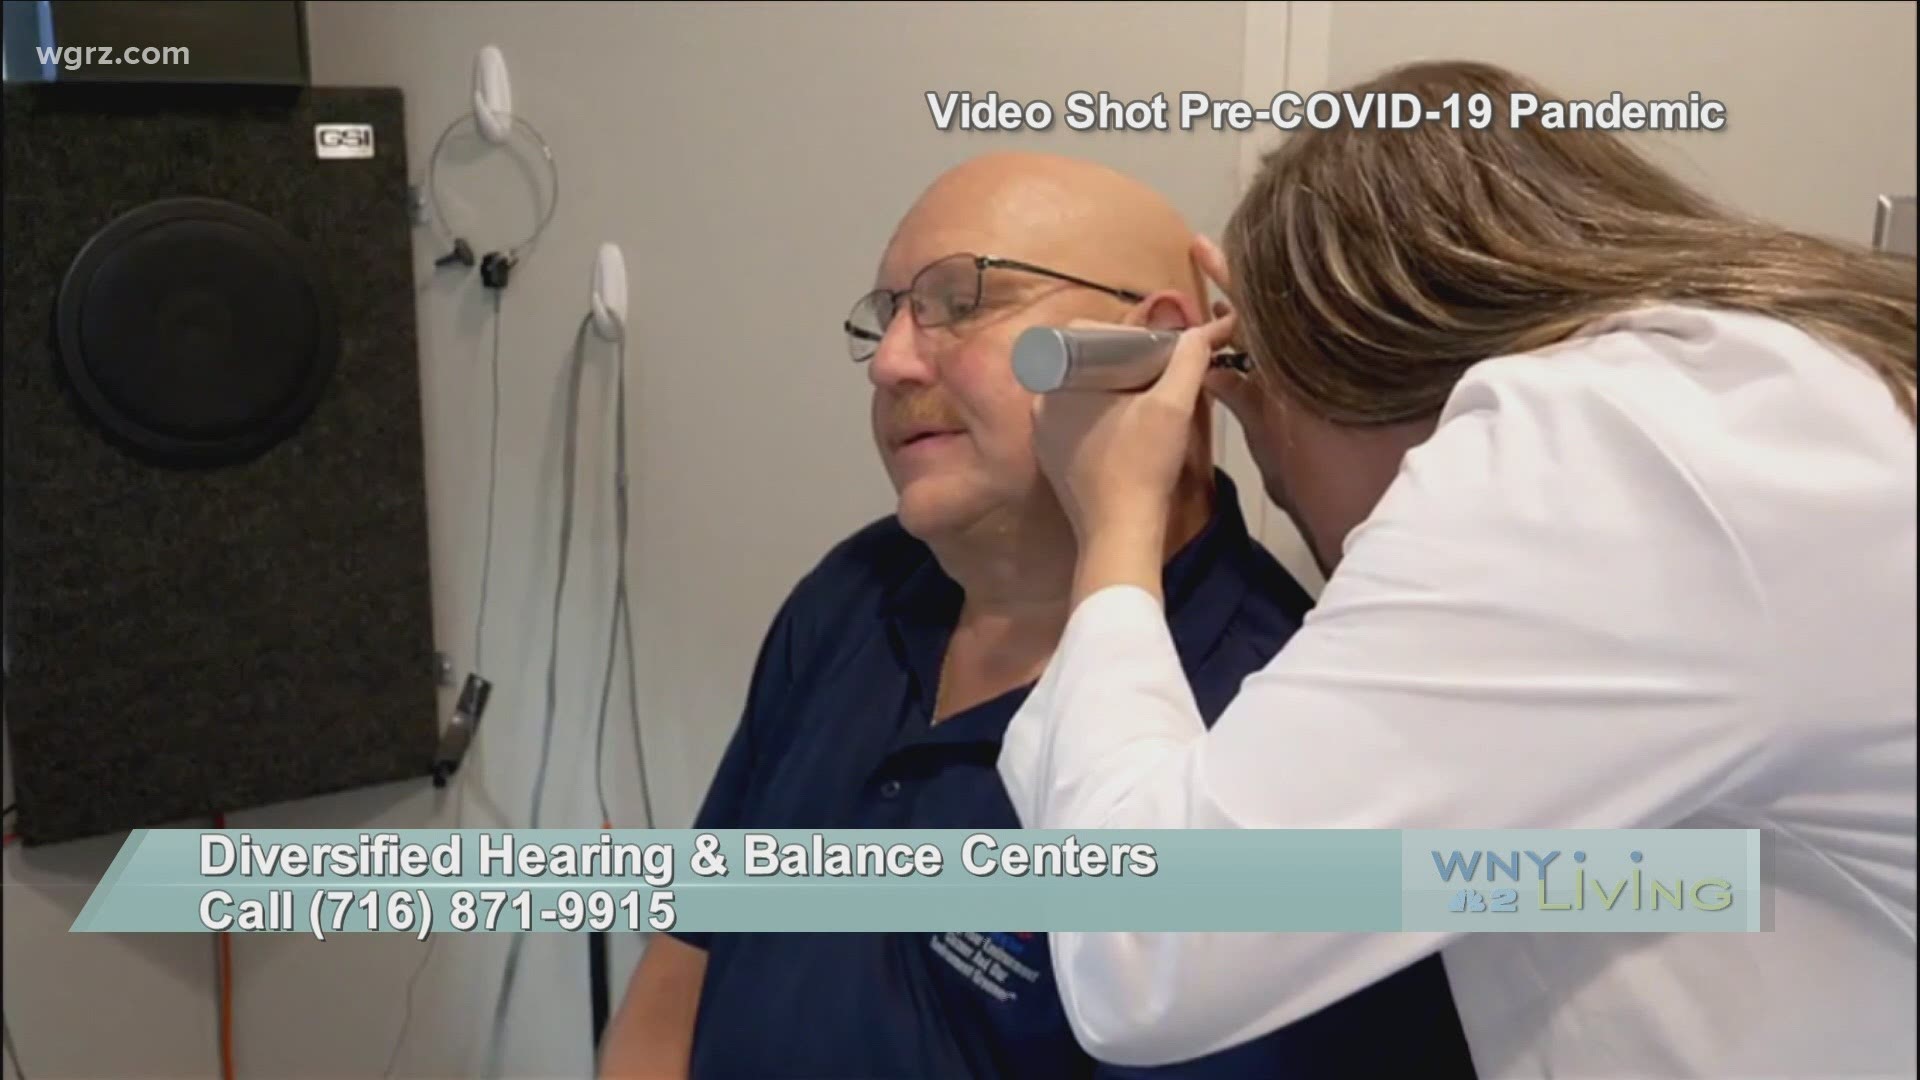 WNY Living - May 29 - Diversified Hearing & Balance Centers (THIS VIDEO IS SPONSORED BY DIVERSIFIED HEARING & BALANCE CENTERS)